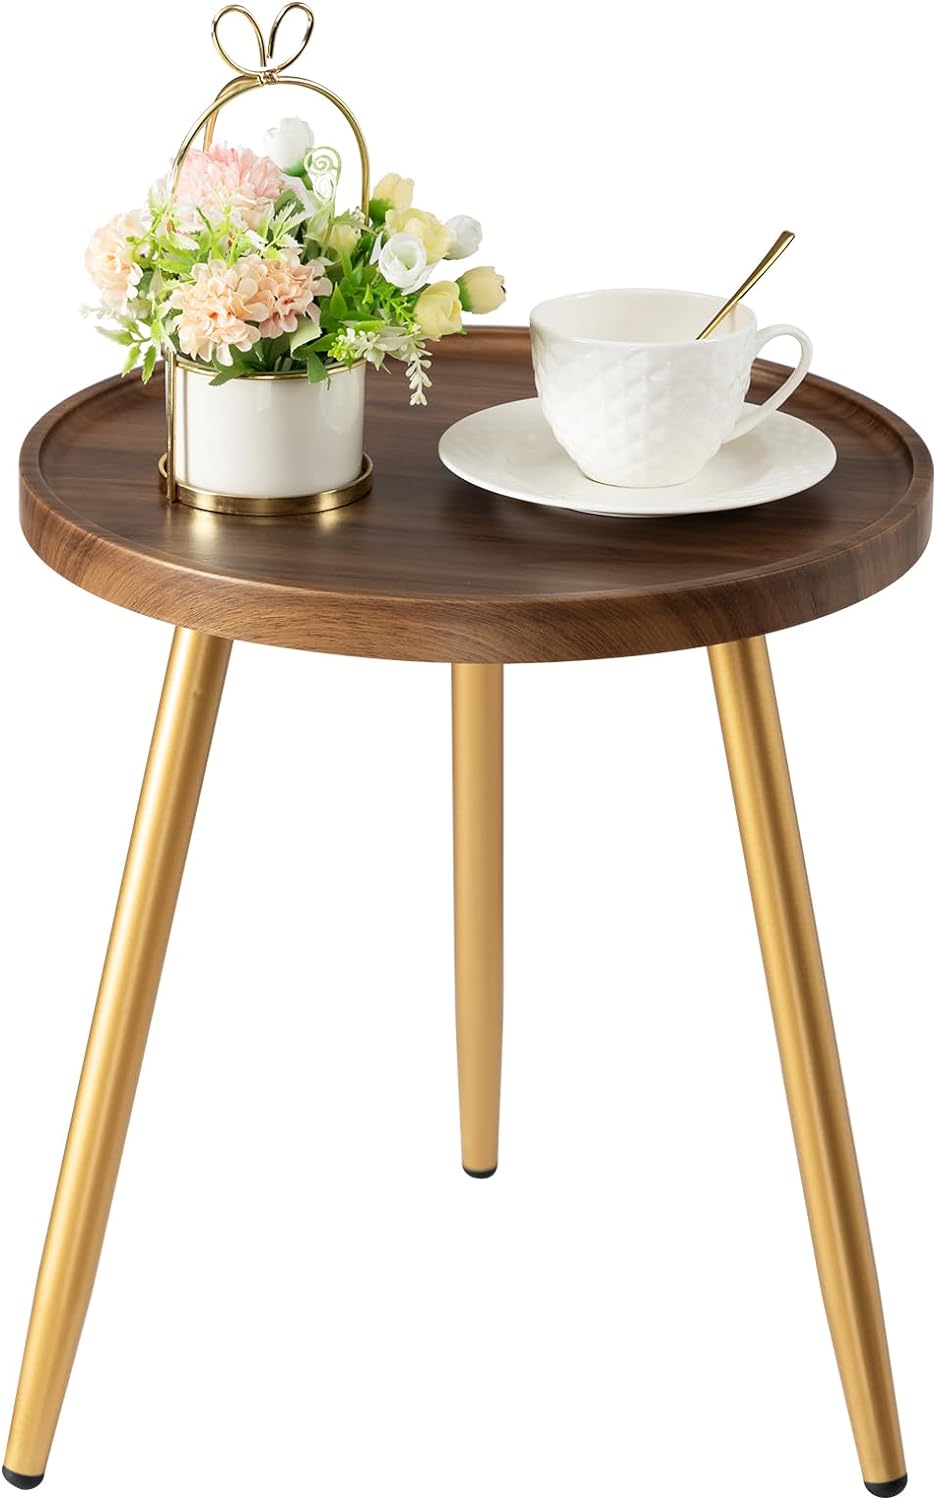 danpinera Round Side Table, Metal Legged Accent Table with Wooden Tray, Small Round End Table for Living Room, Bedroom, Nursery, Brown & Gold